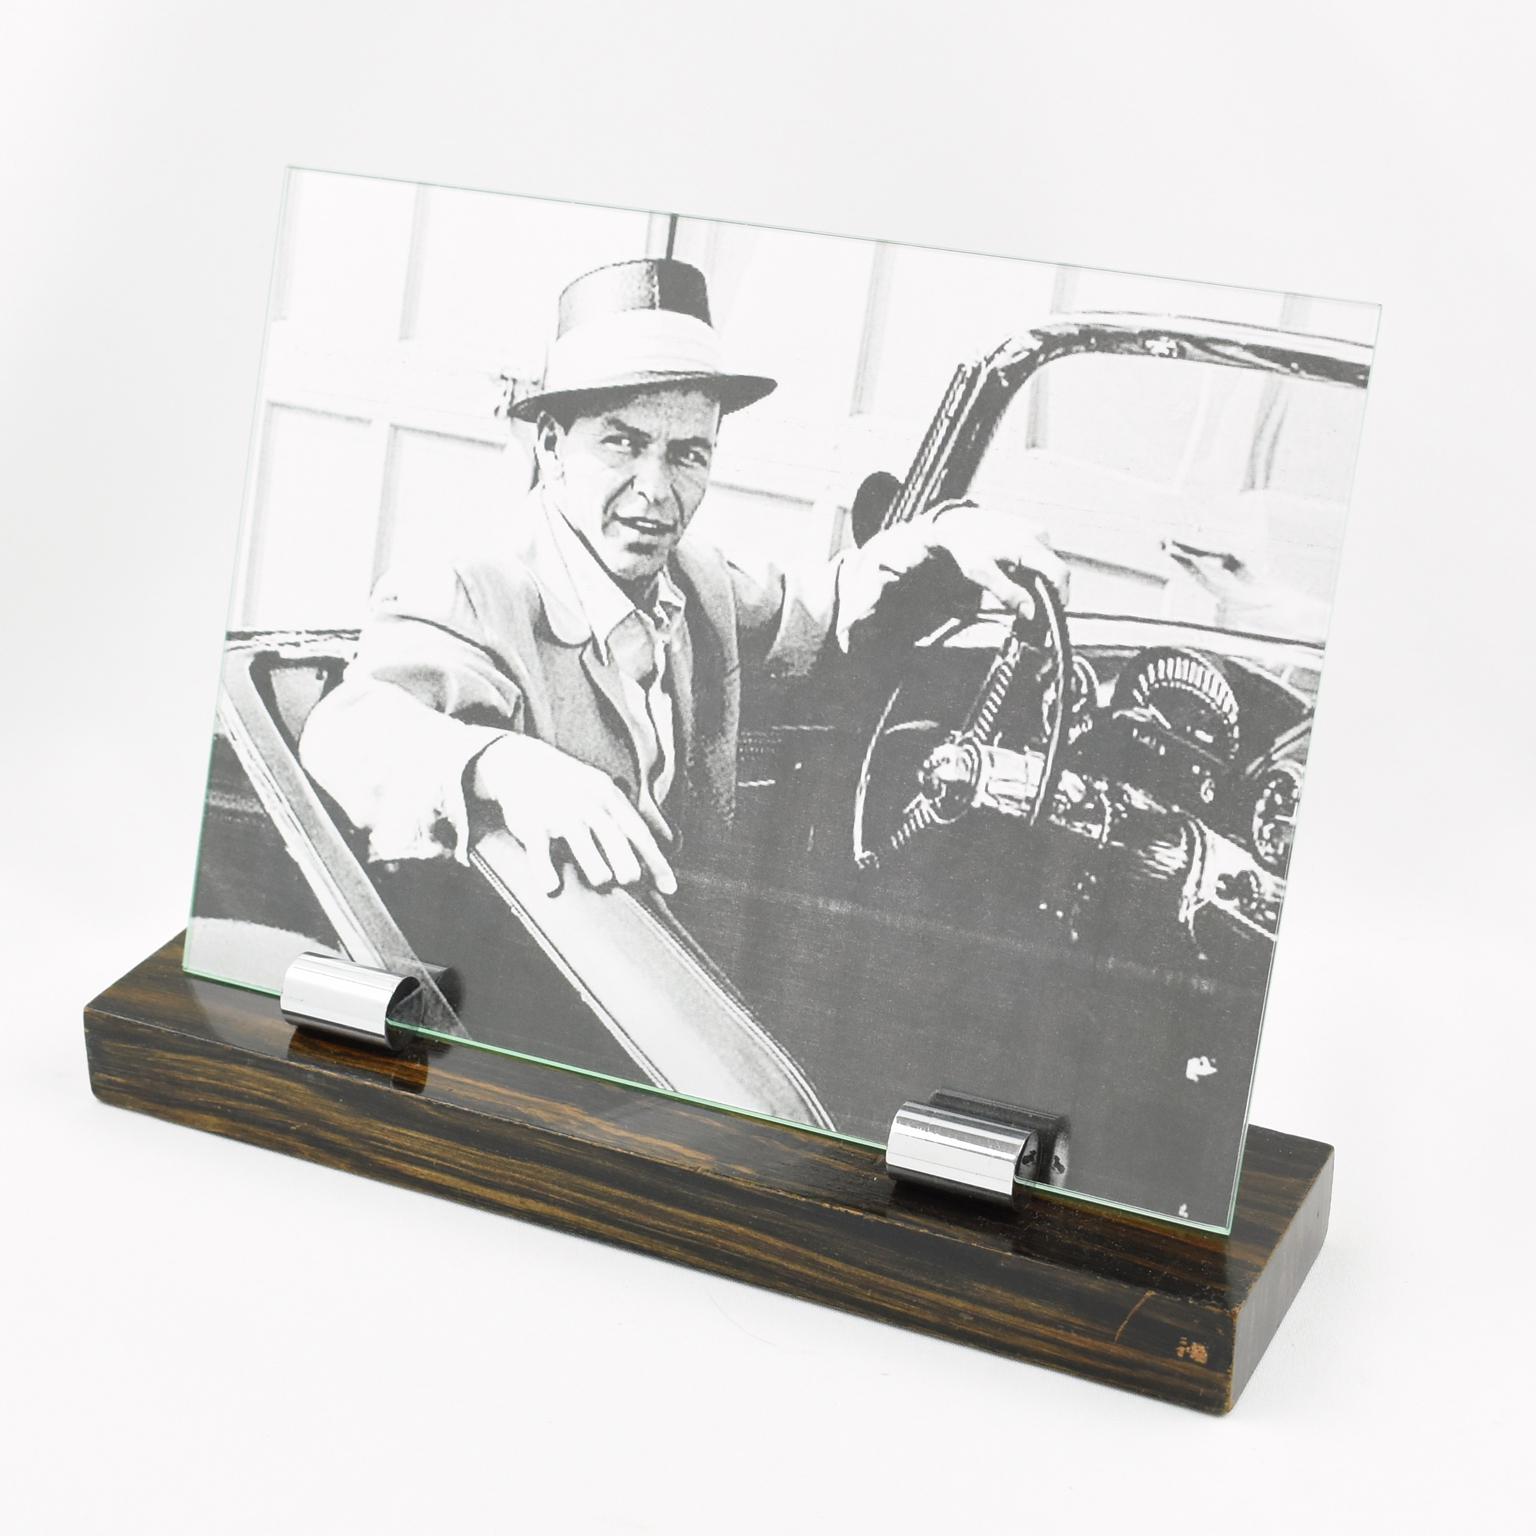 Elegant 1930s Art Deco picture photo frame, featuring thick hand-rubbed wood plinth with Macassar wood pattern and polished chromed metal sticks and ball. The frame is complete with its two glass sheets to enclose the photograph. The picture can be